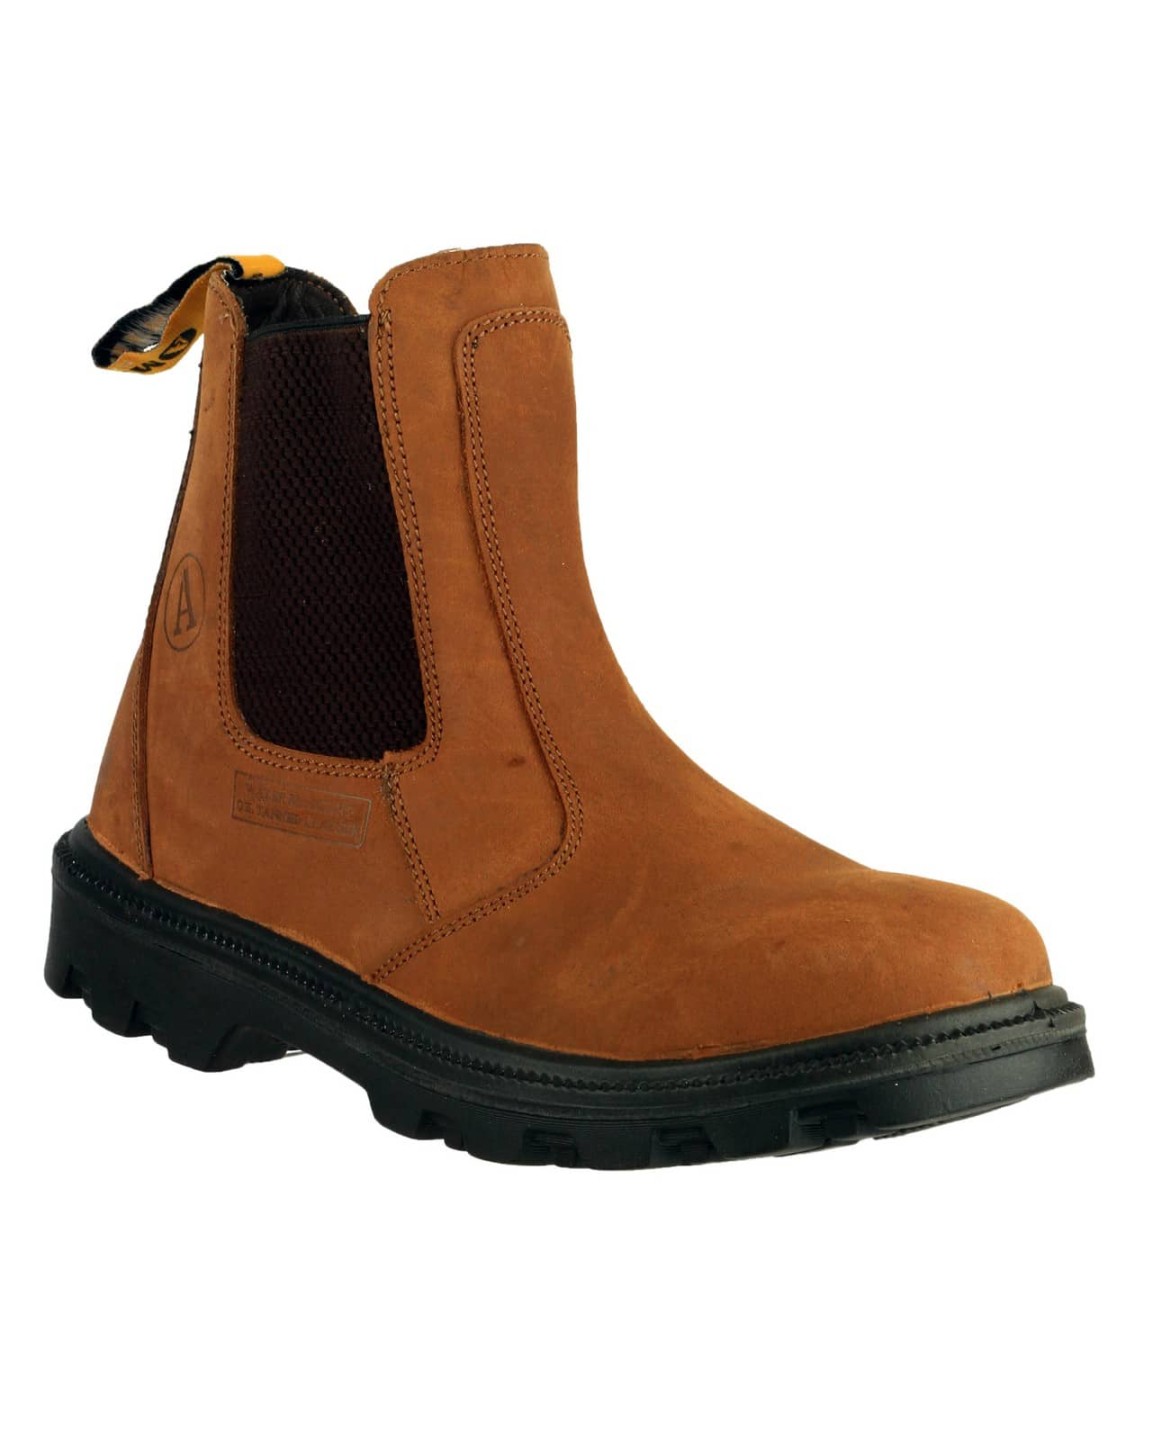 FS131 Water Resistant Pull on Safety Dealer Boot